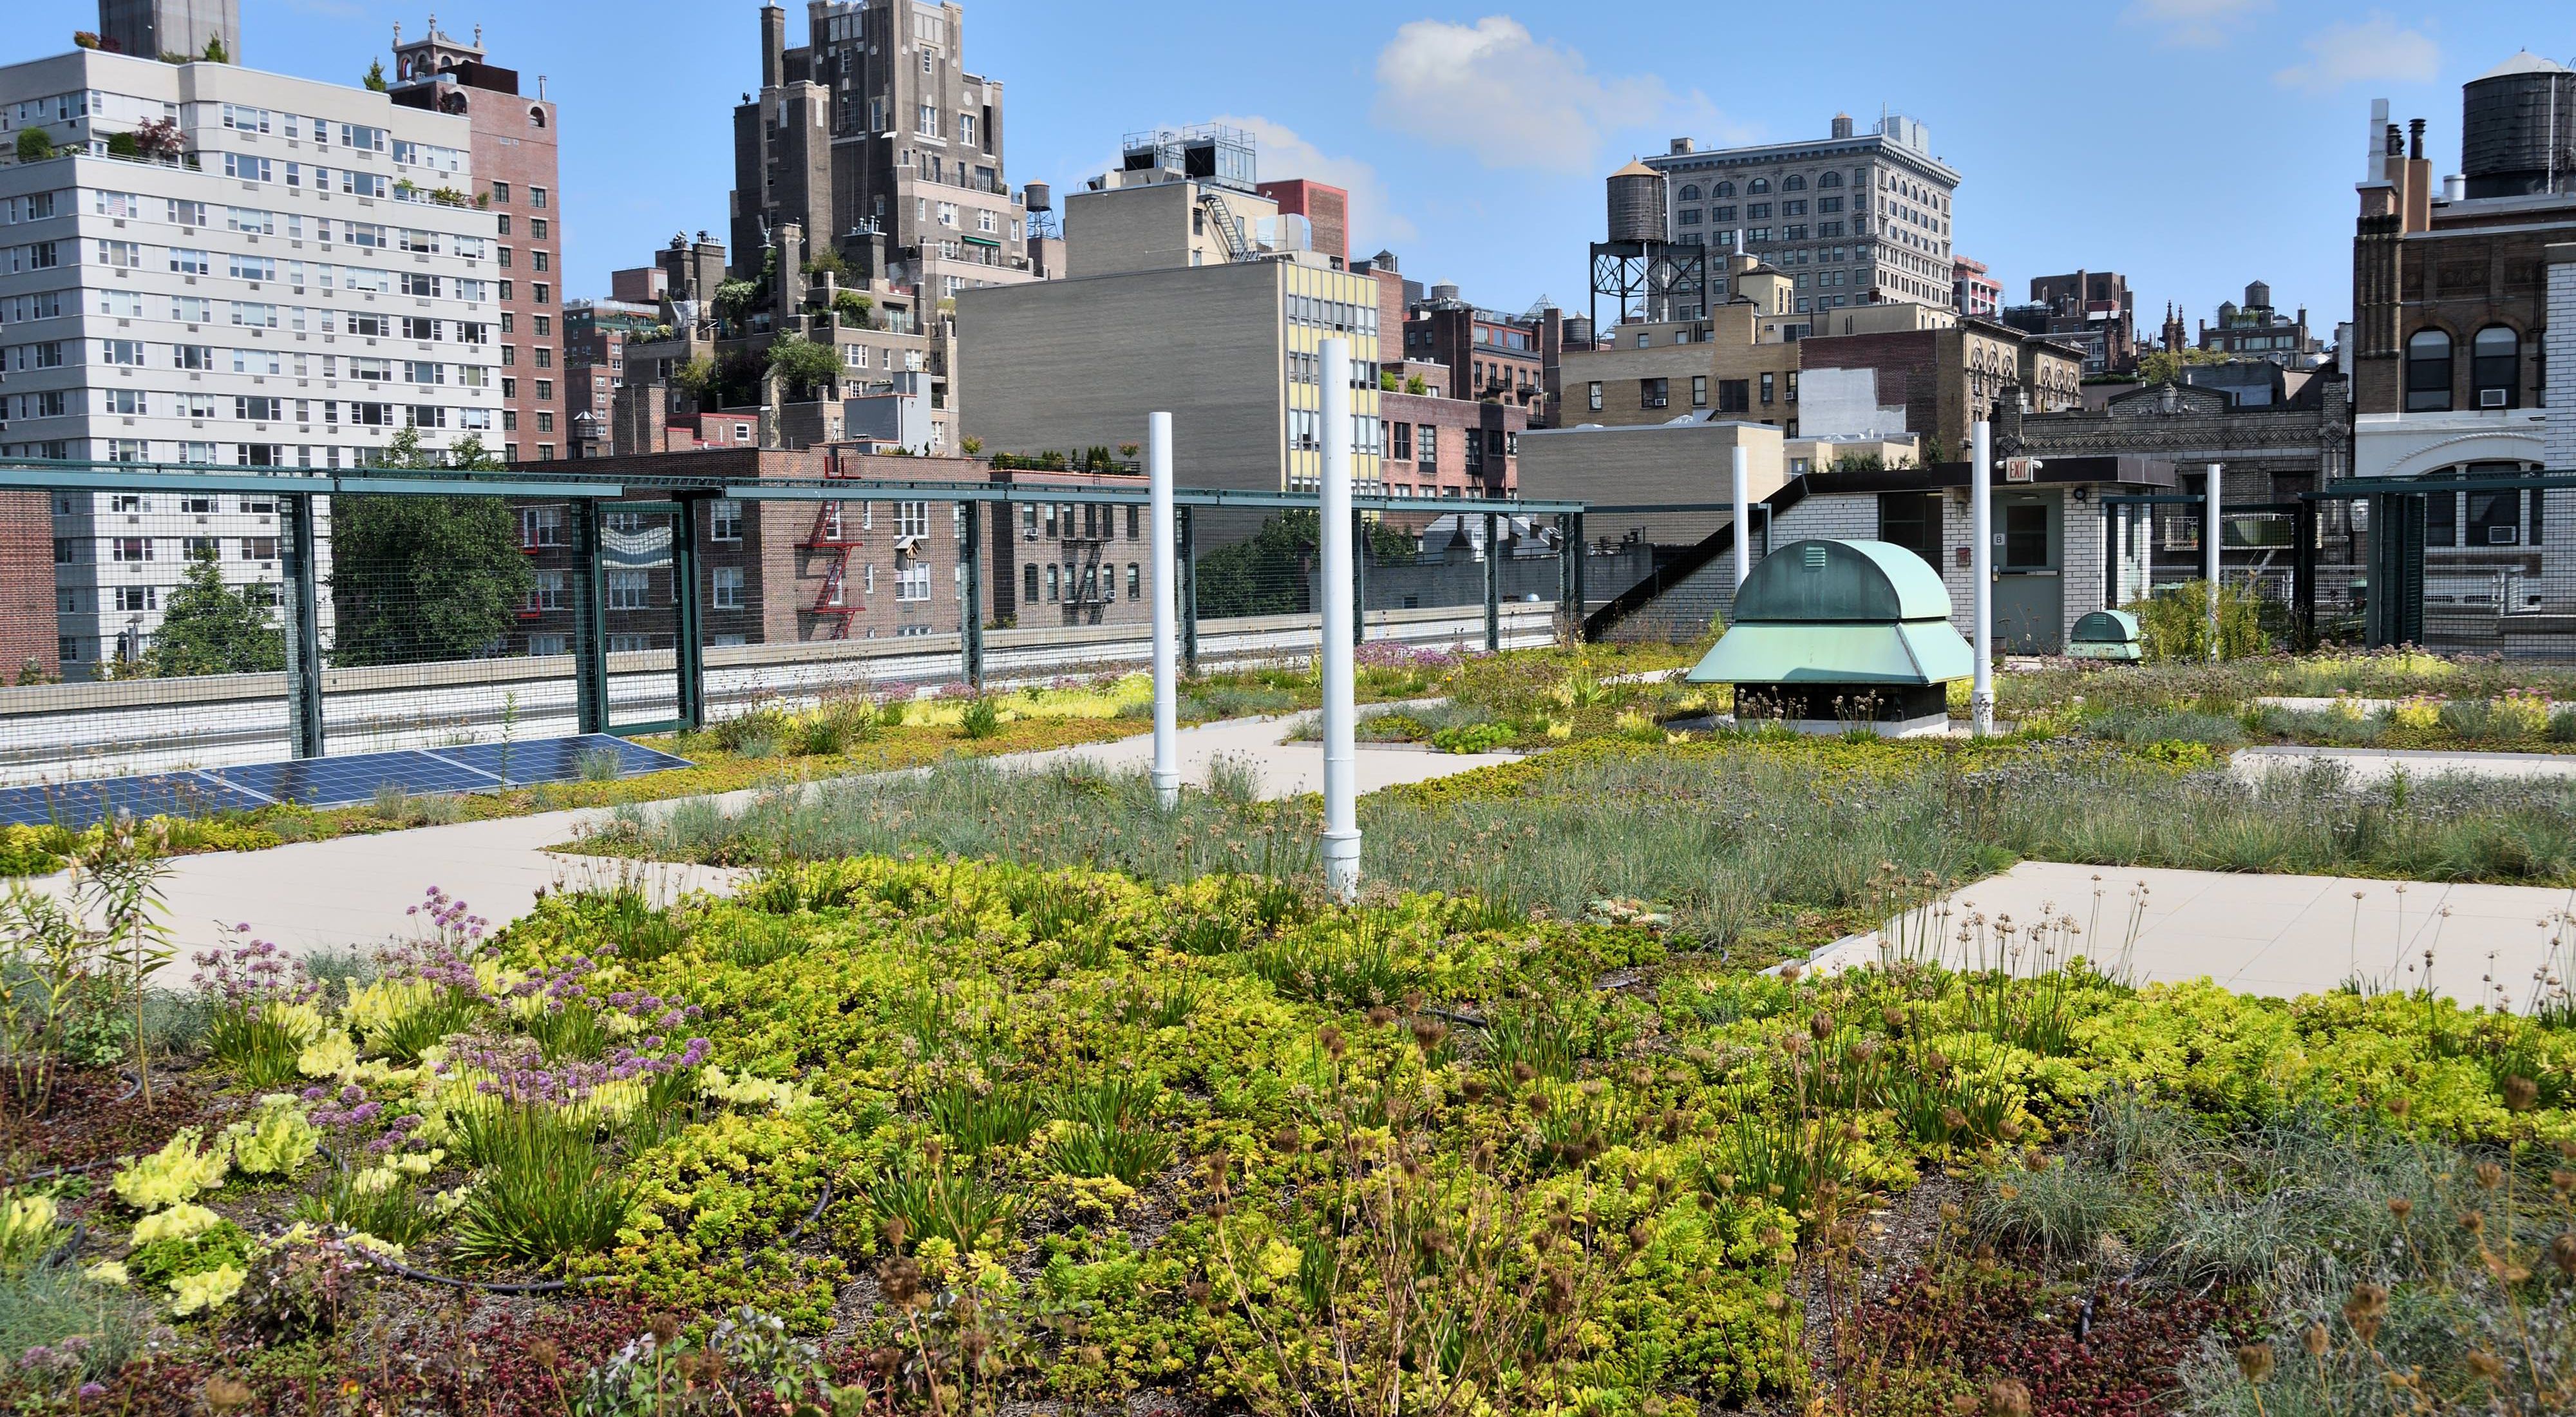 Green roof garden on a NYC building.